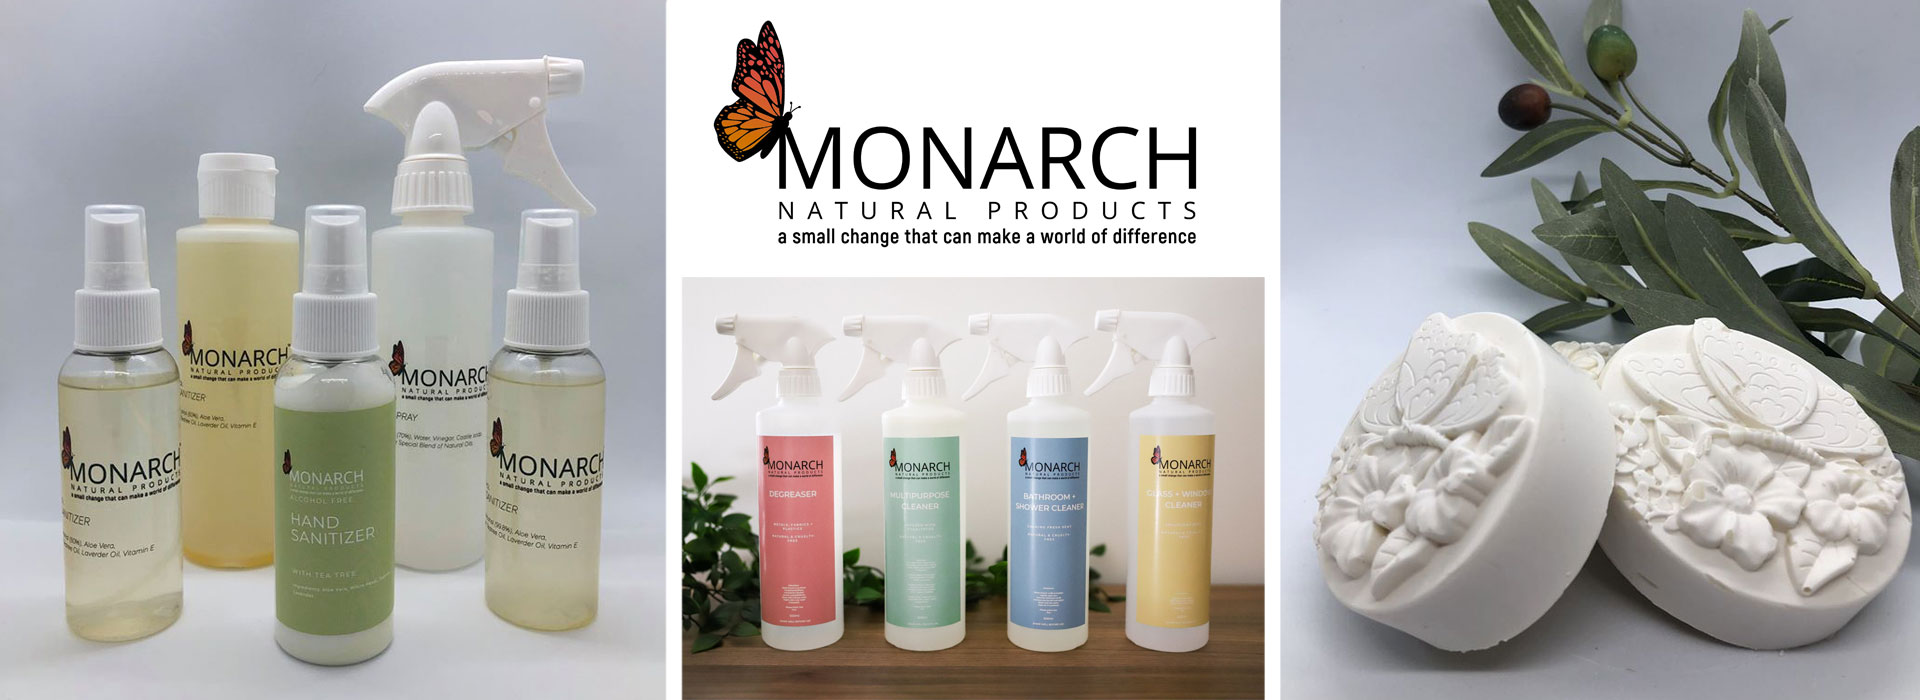 Monarch Natural Products Banner 